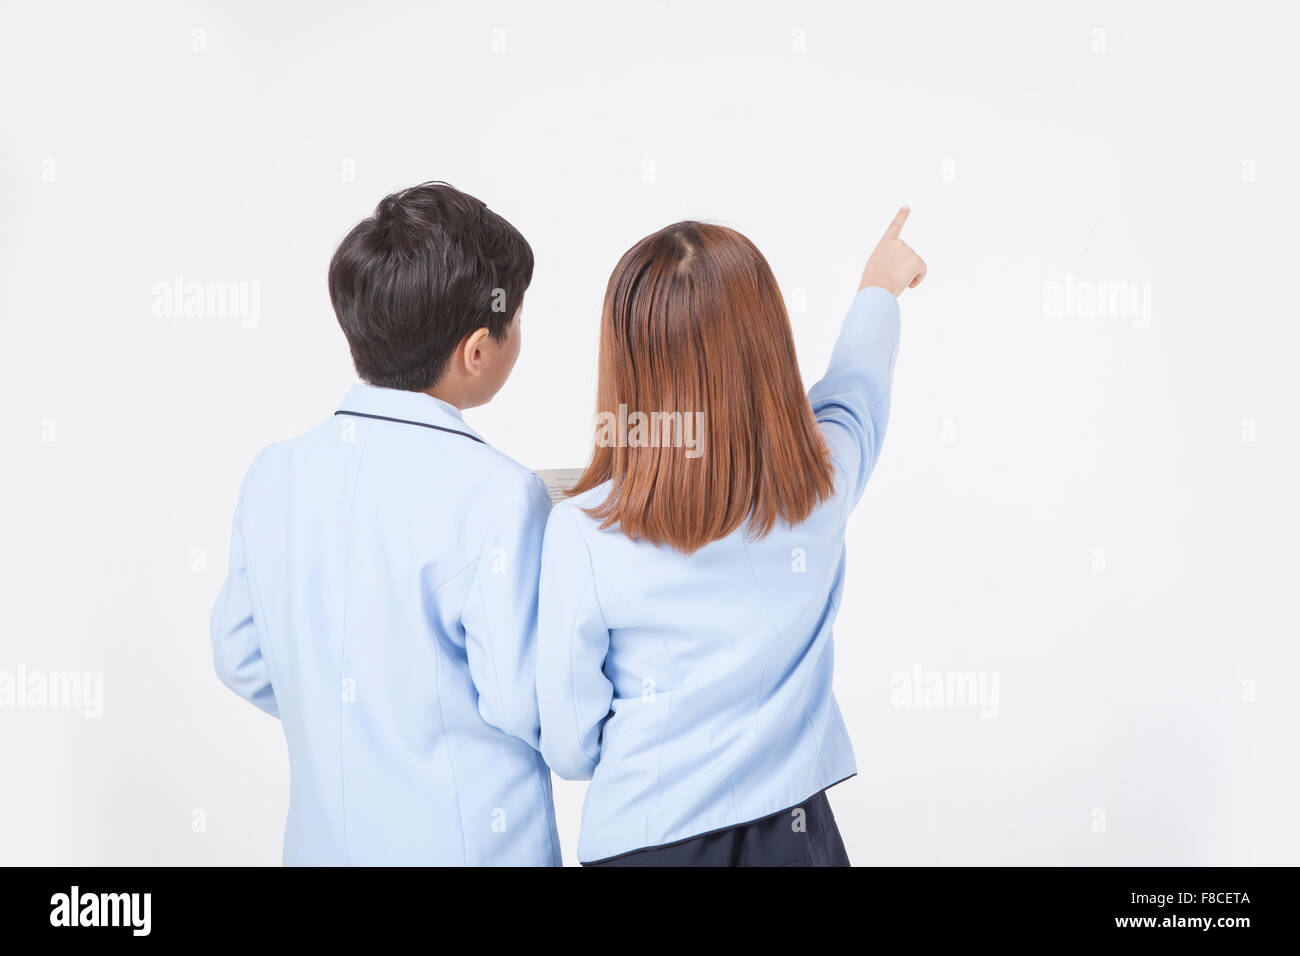 Back appearance of elementary school boy and girl in school uniforms with her finger pointing Stock Photo